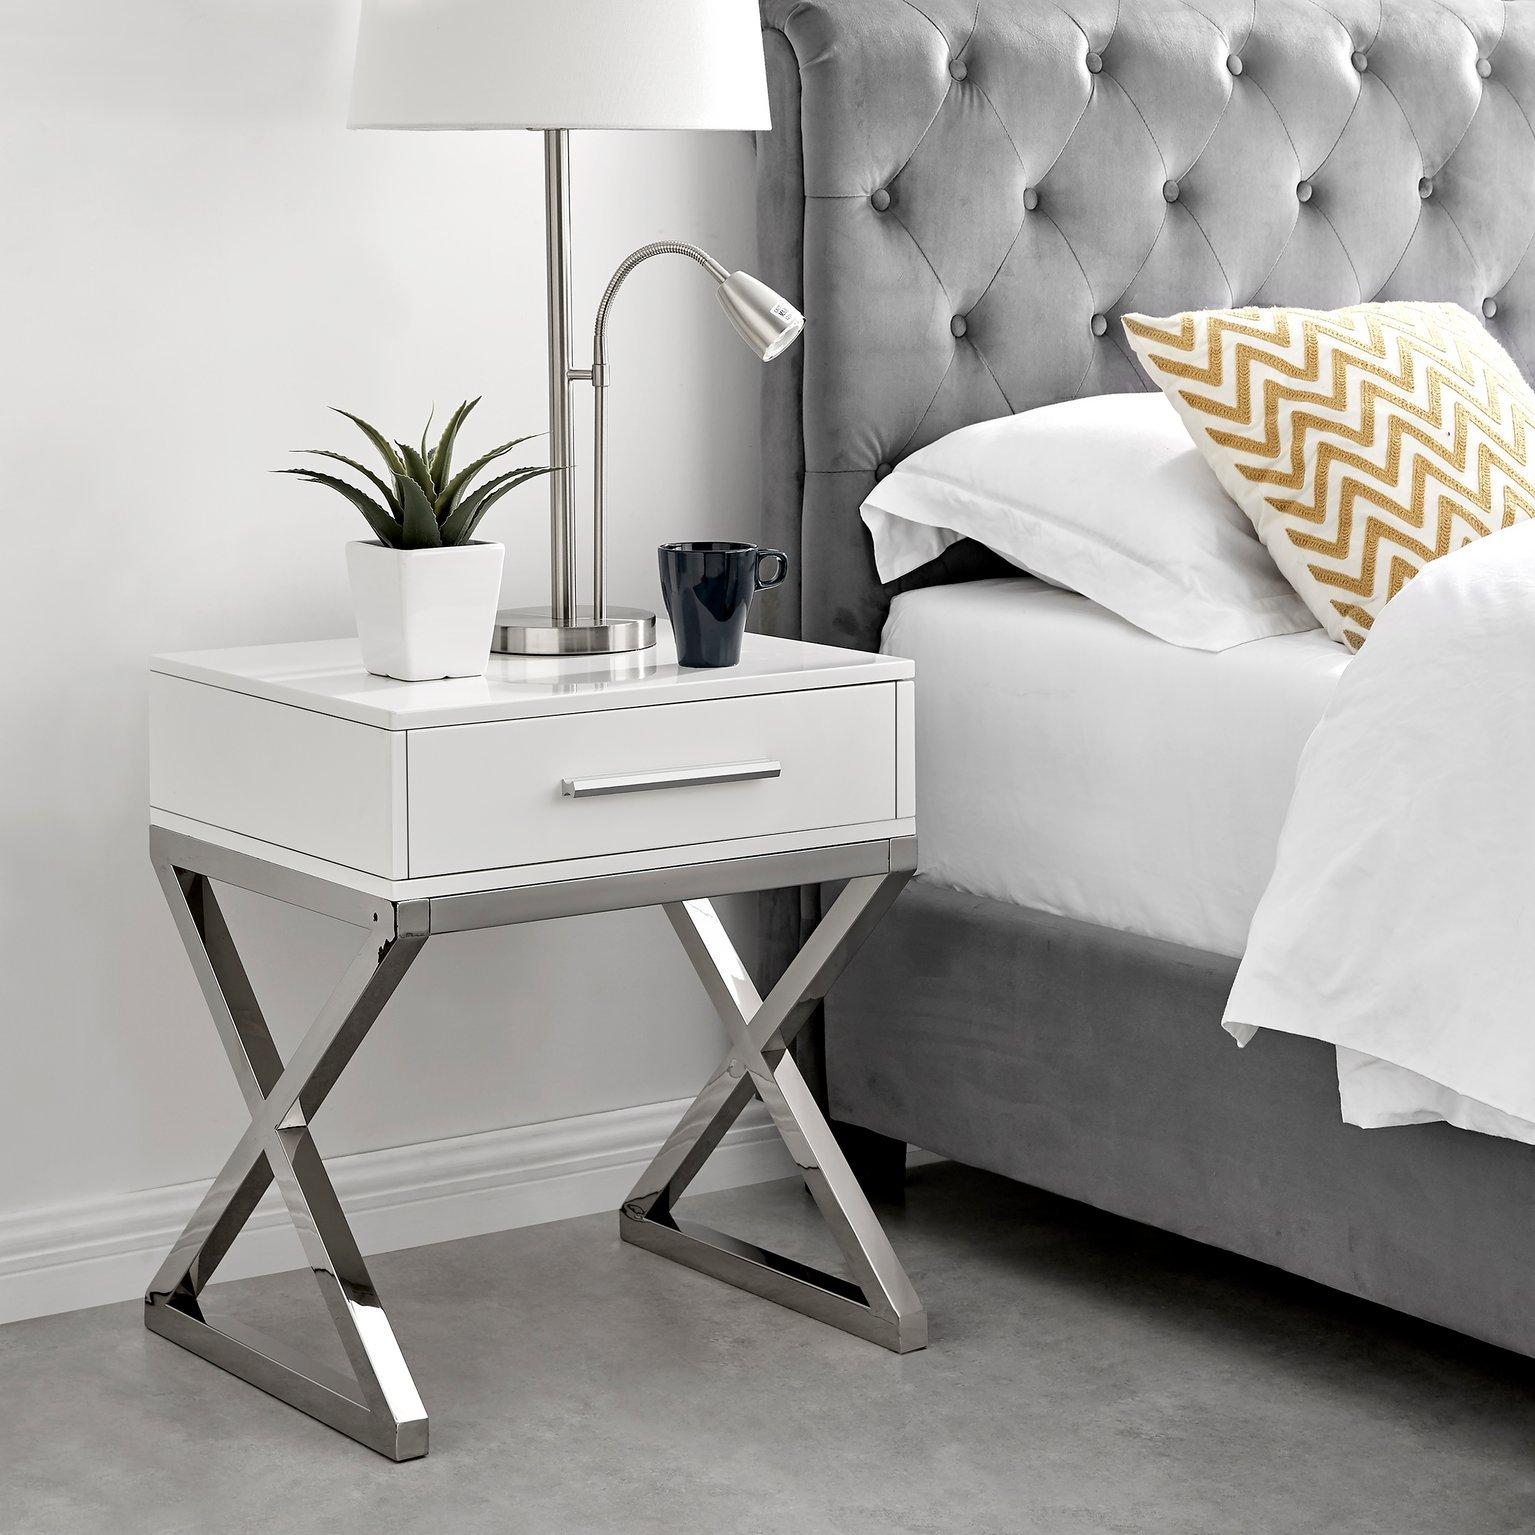 Oxford White High Gloss Contemporary Bedside Table With Single Drawer and Silver Chrome Legs